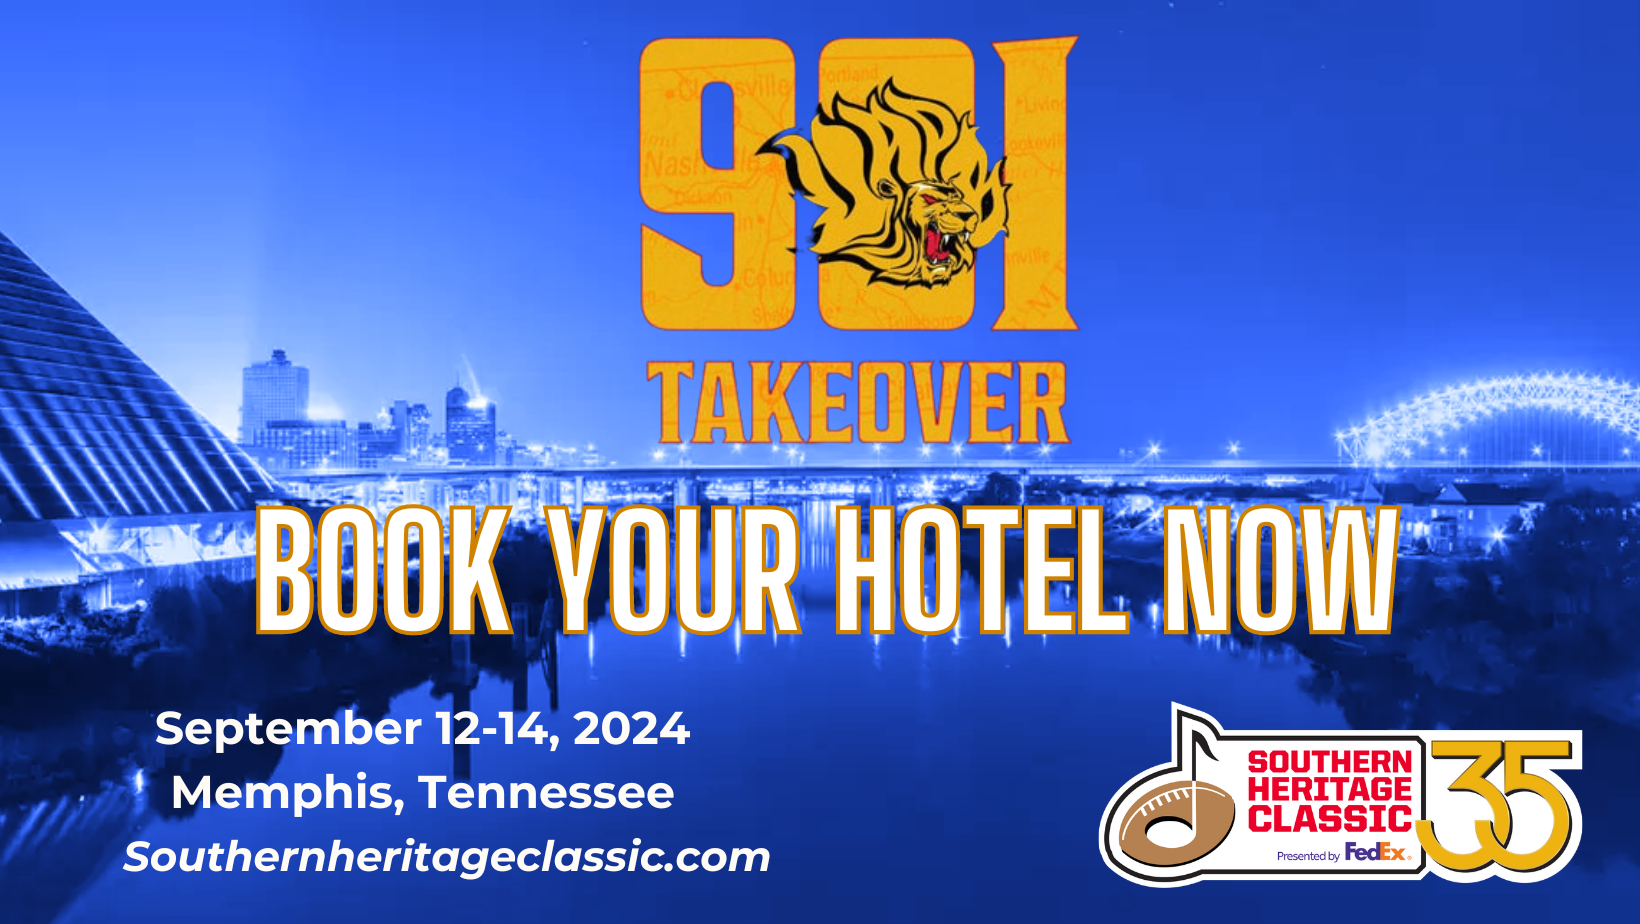 Hyatt Centric/Caption – Official Golden Lions Host Hotel for the 35th Southern Heritage Classic